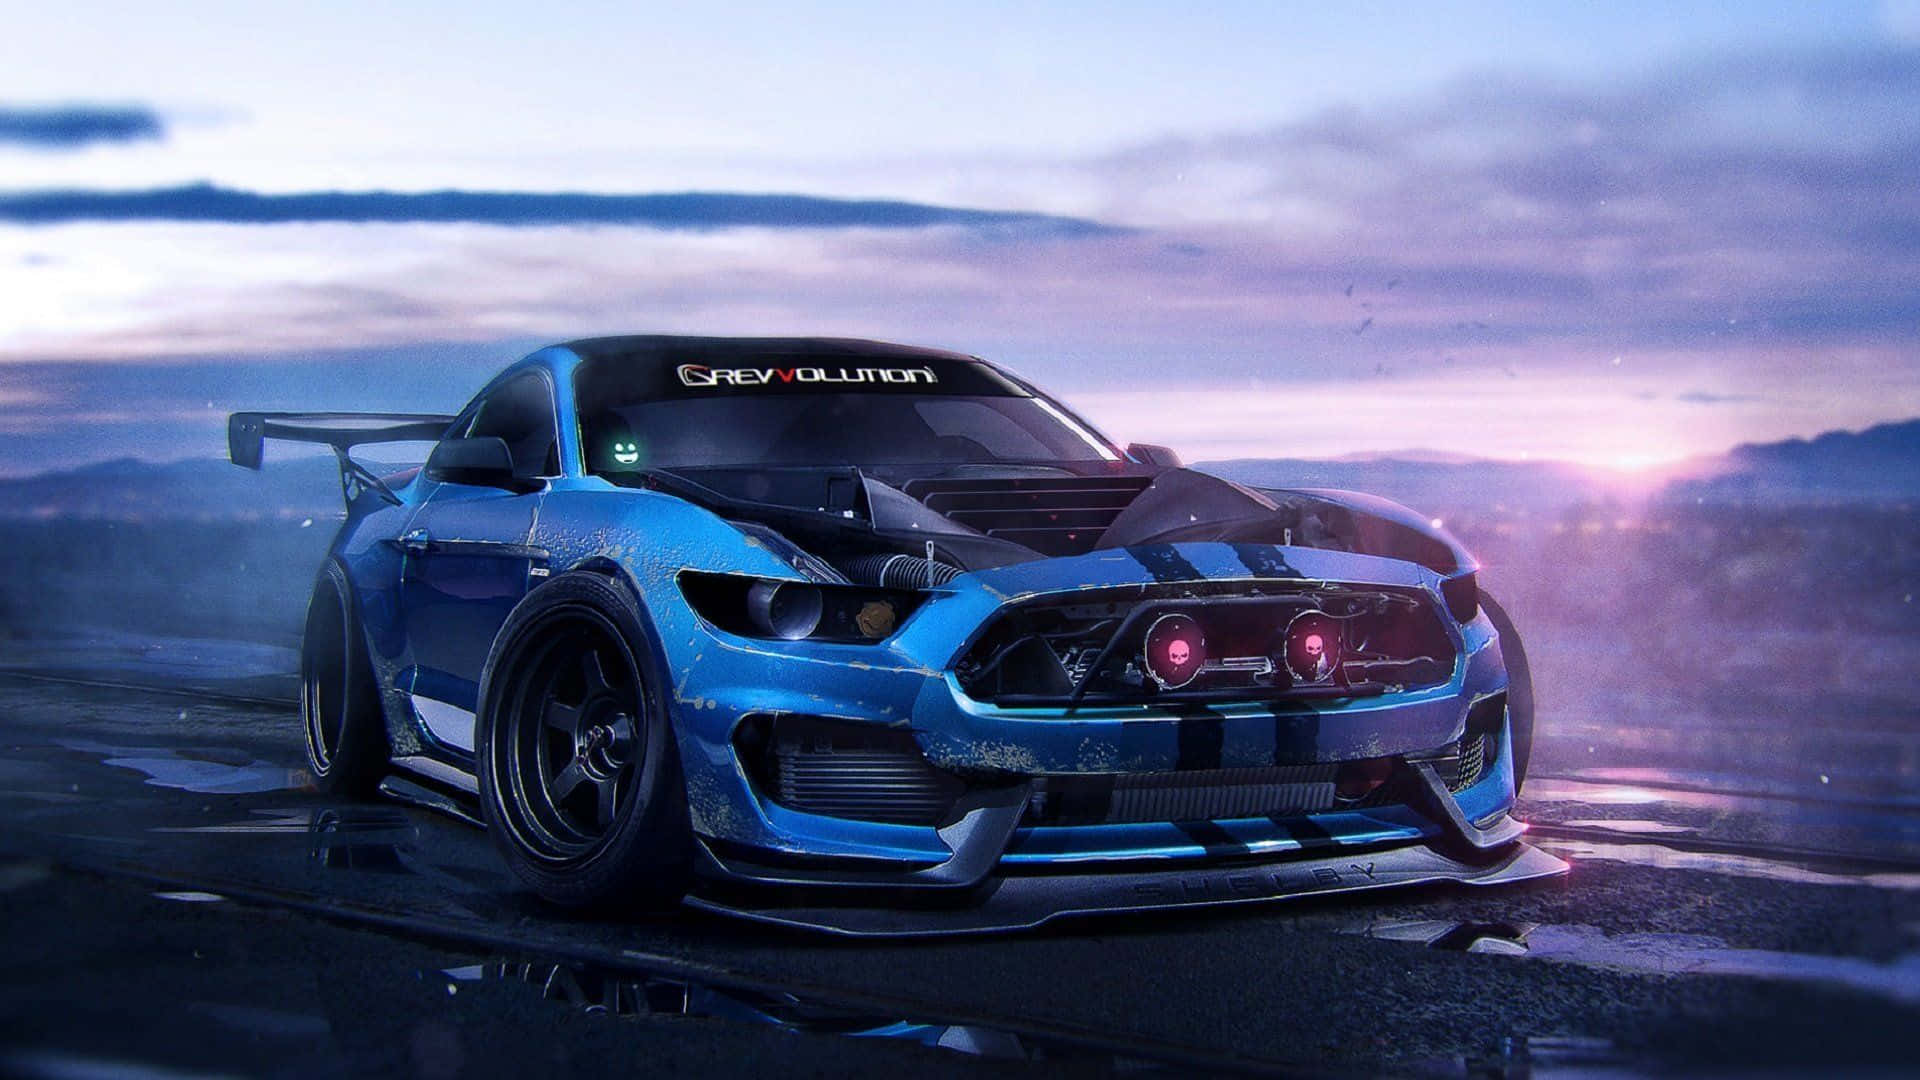 Majestic Ford Mustang Shelby GT350 on the Open Road Wallpaper